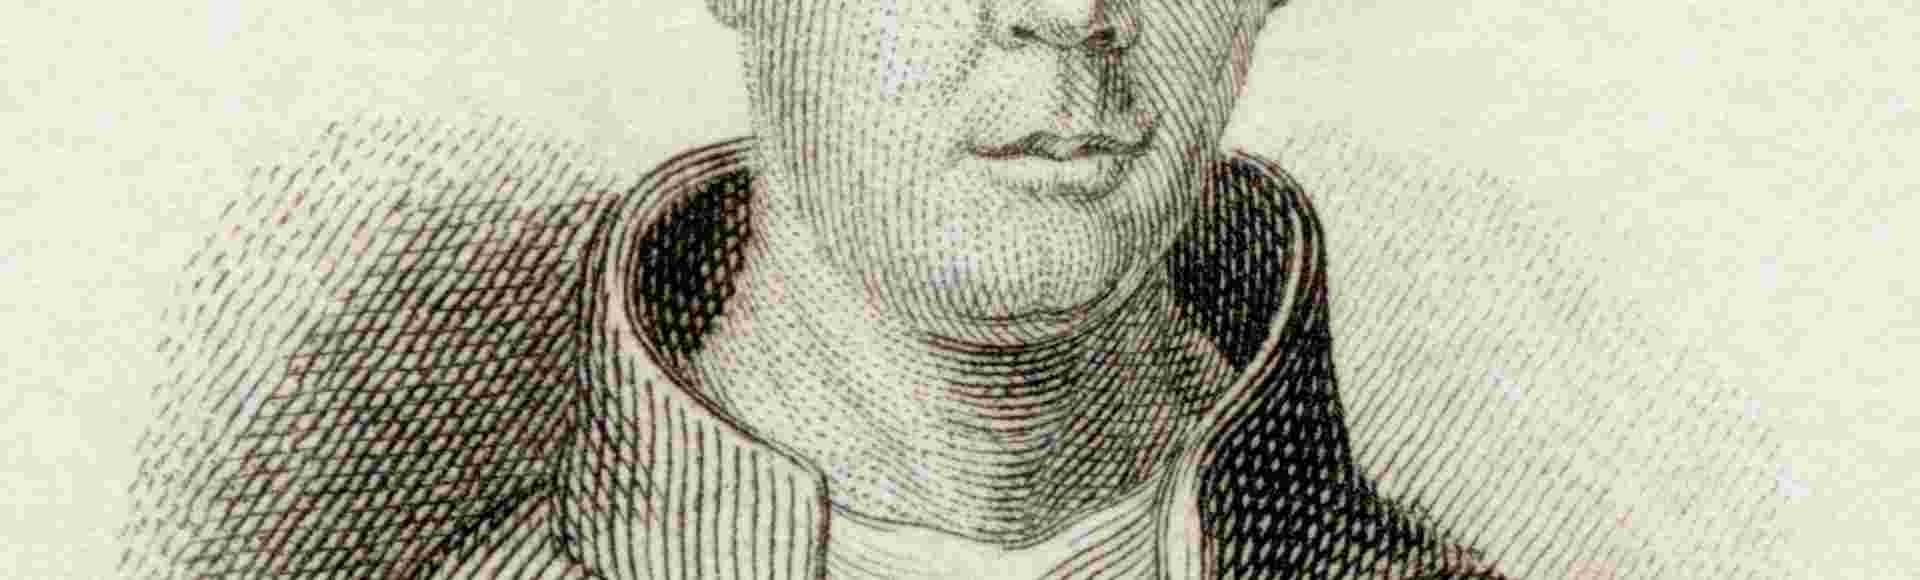 Gerald of Wales, 1146-1223.